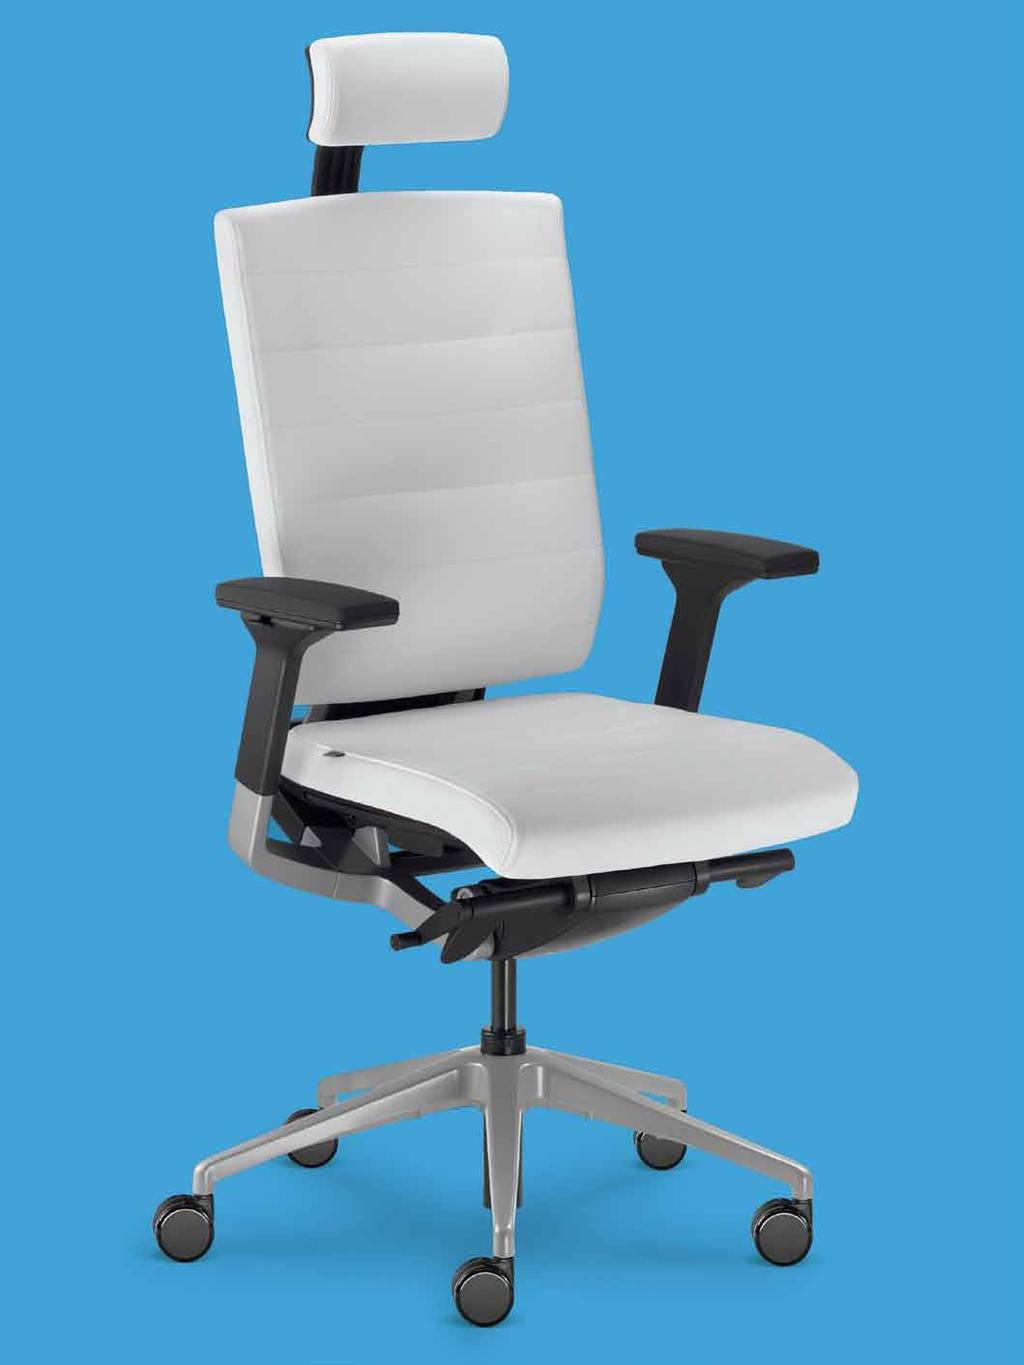 active Displaying striking innovative elements, Active is a modern, attractively designed work chair with superb ergonomics.